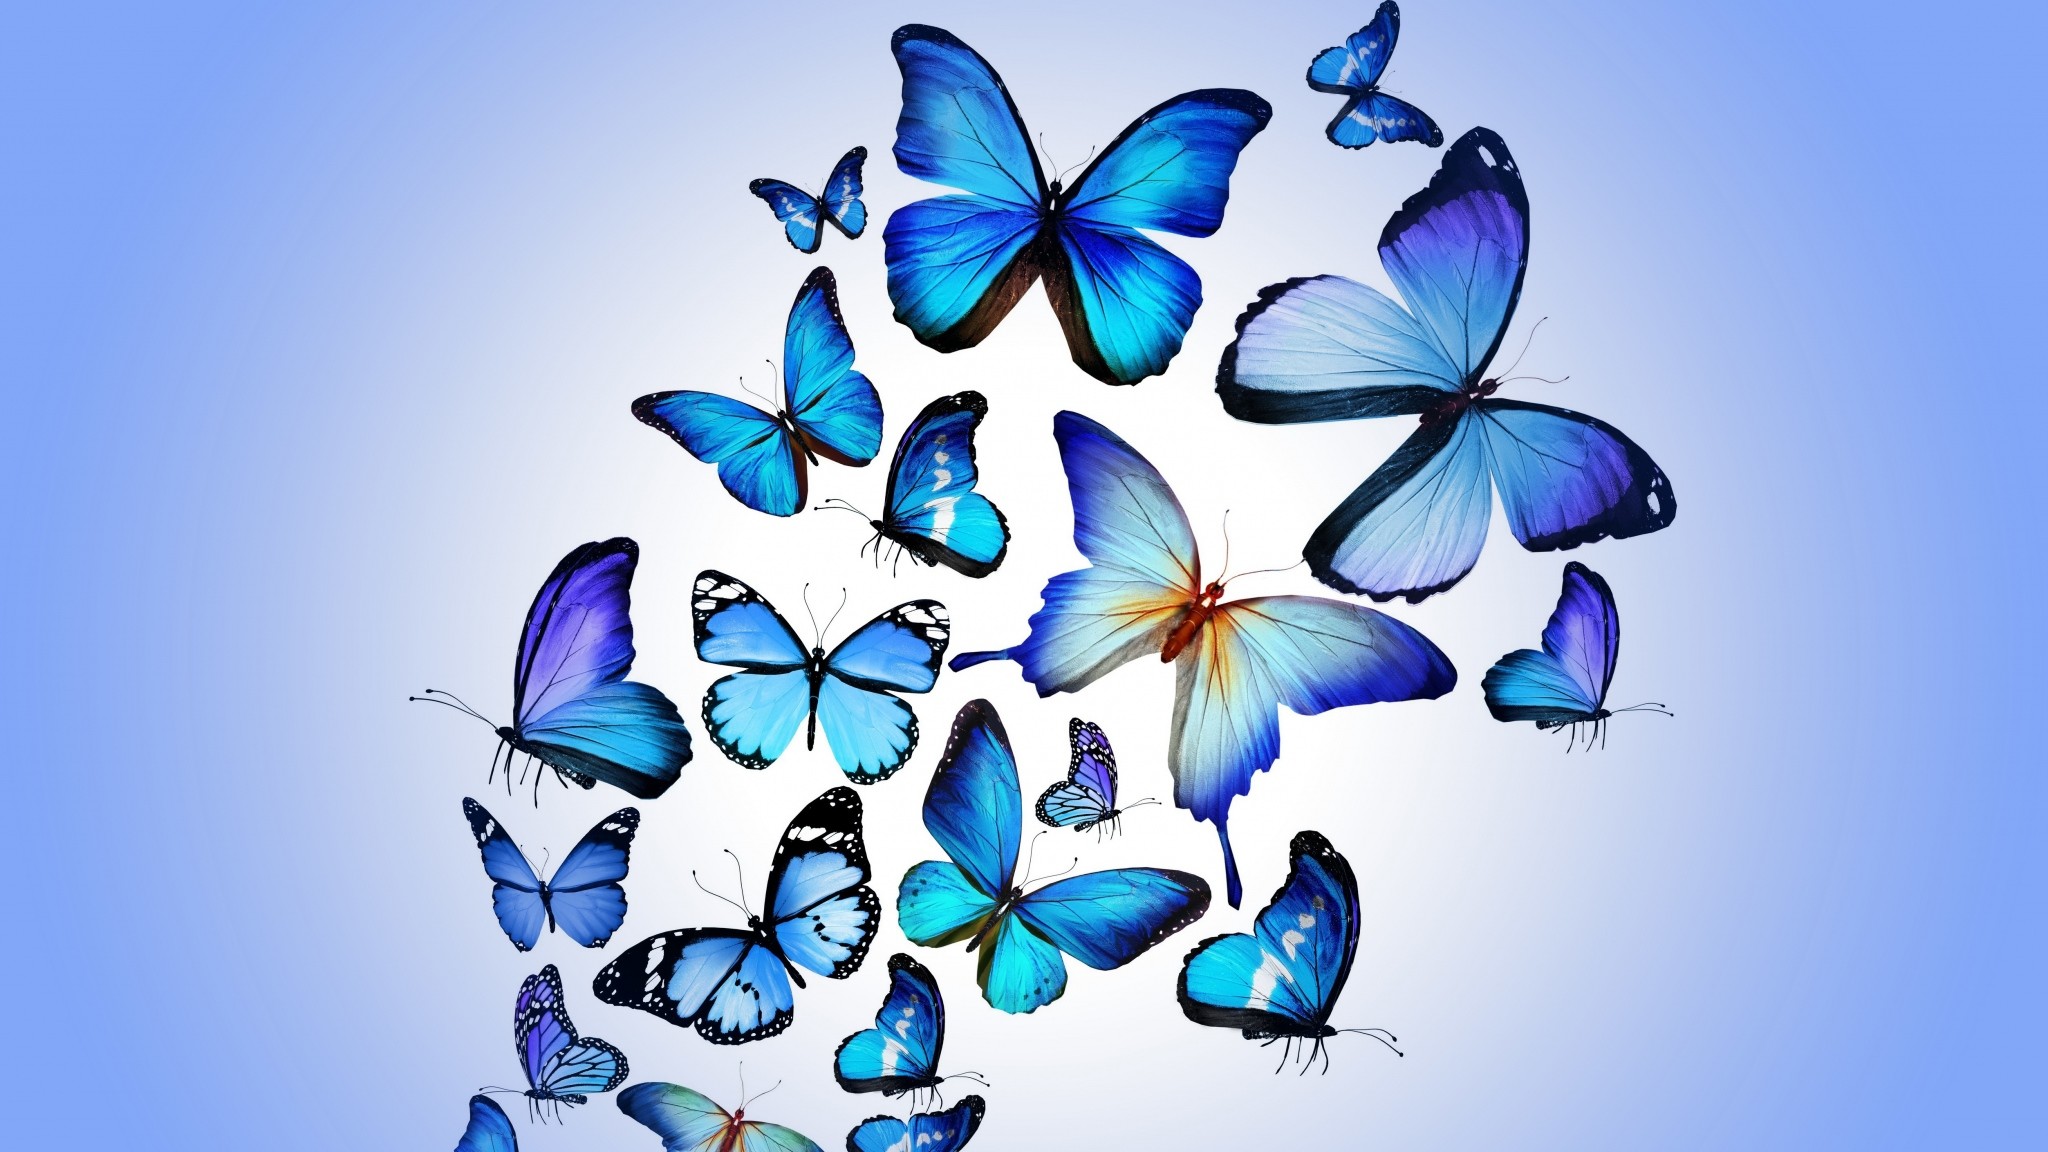 Find out: Vintage Butterfly wallpaper /vintage- butterfly